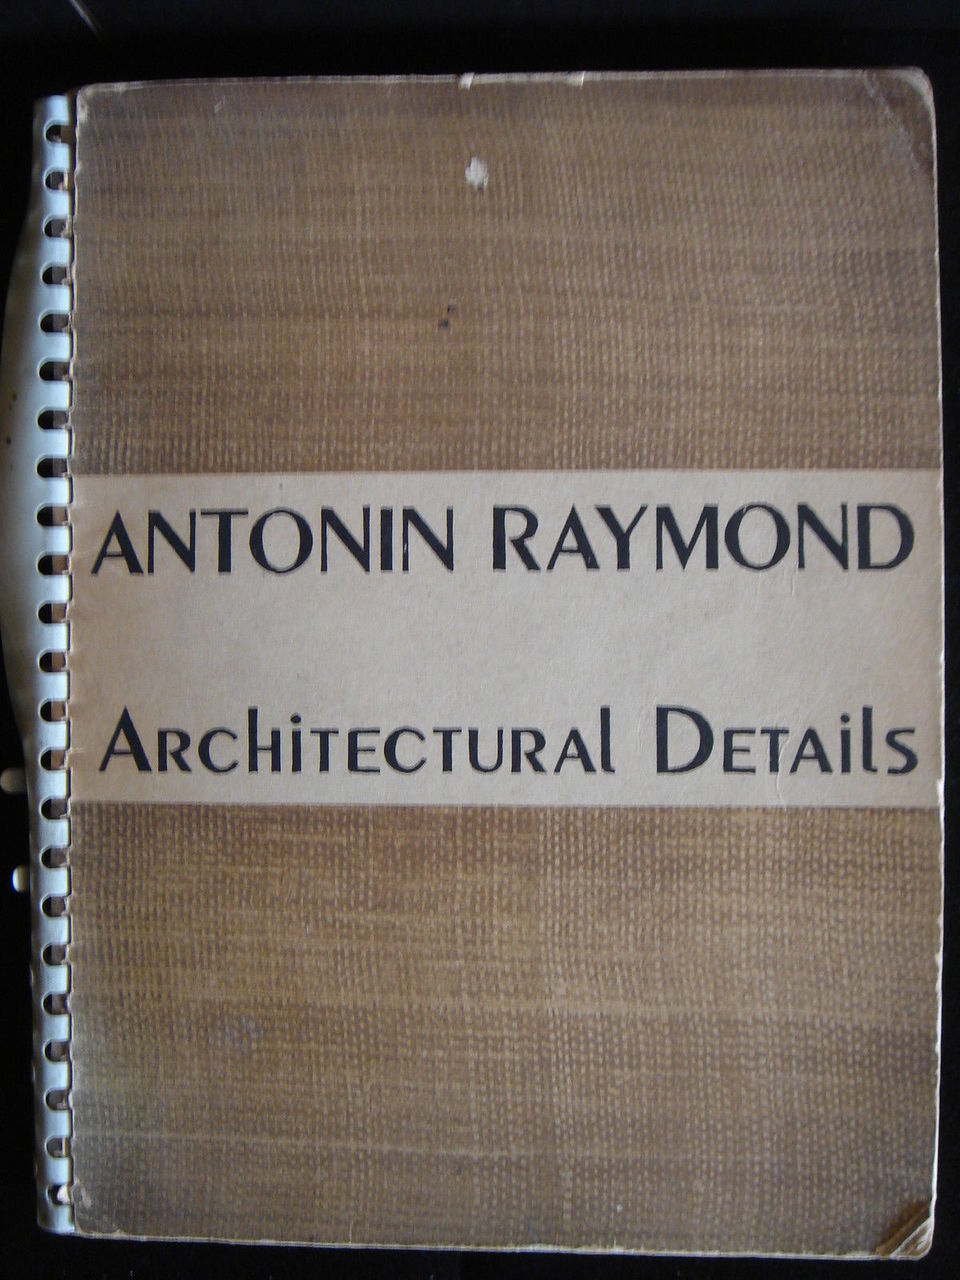 ARCHITECTURAL DETAILS, by Antonin Raymond - 1947 